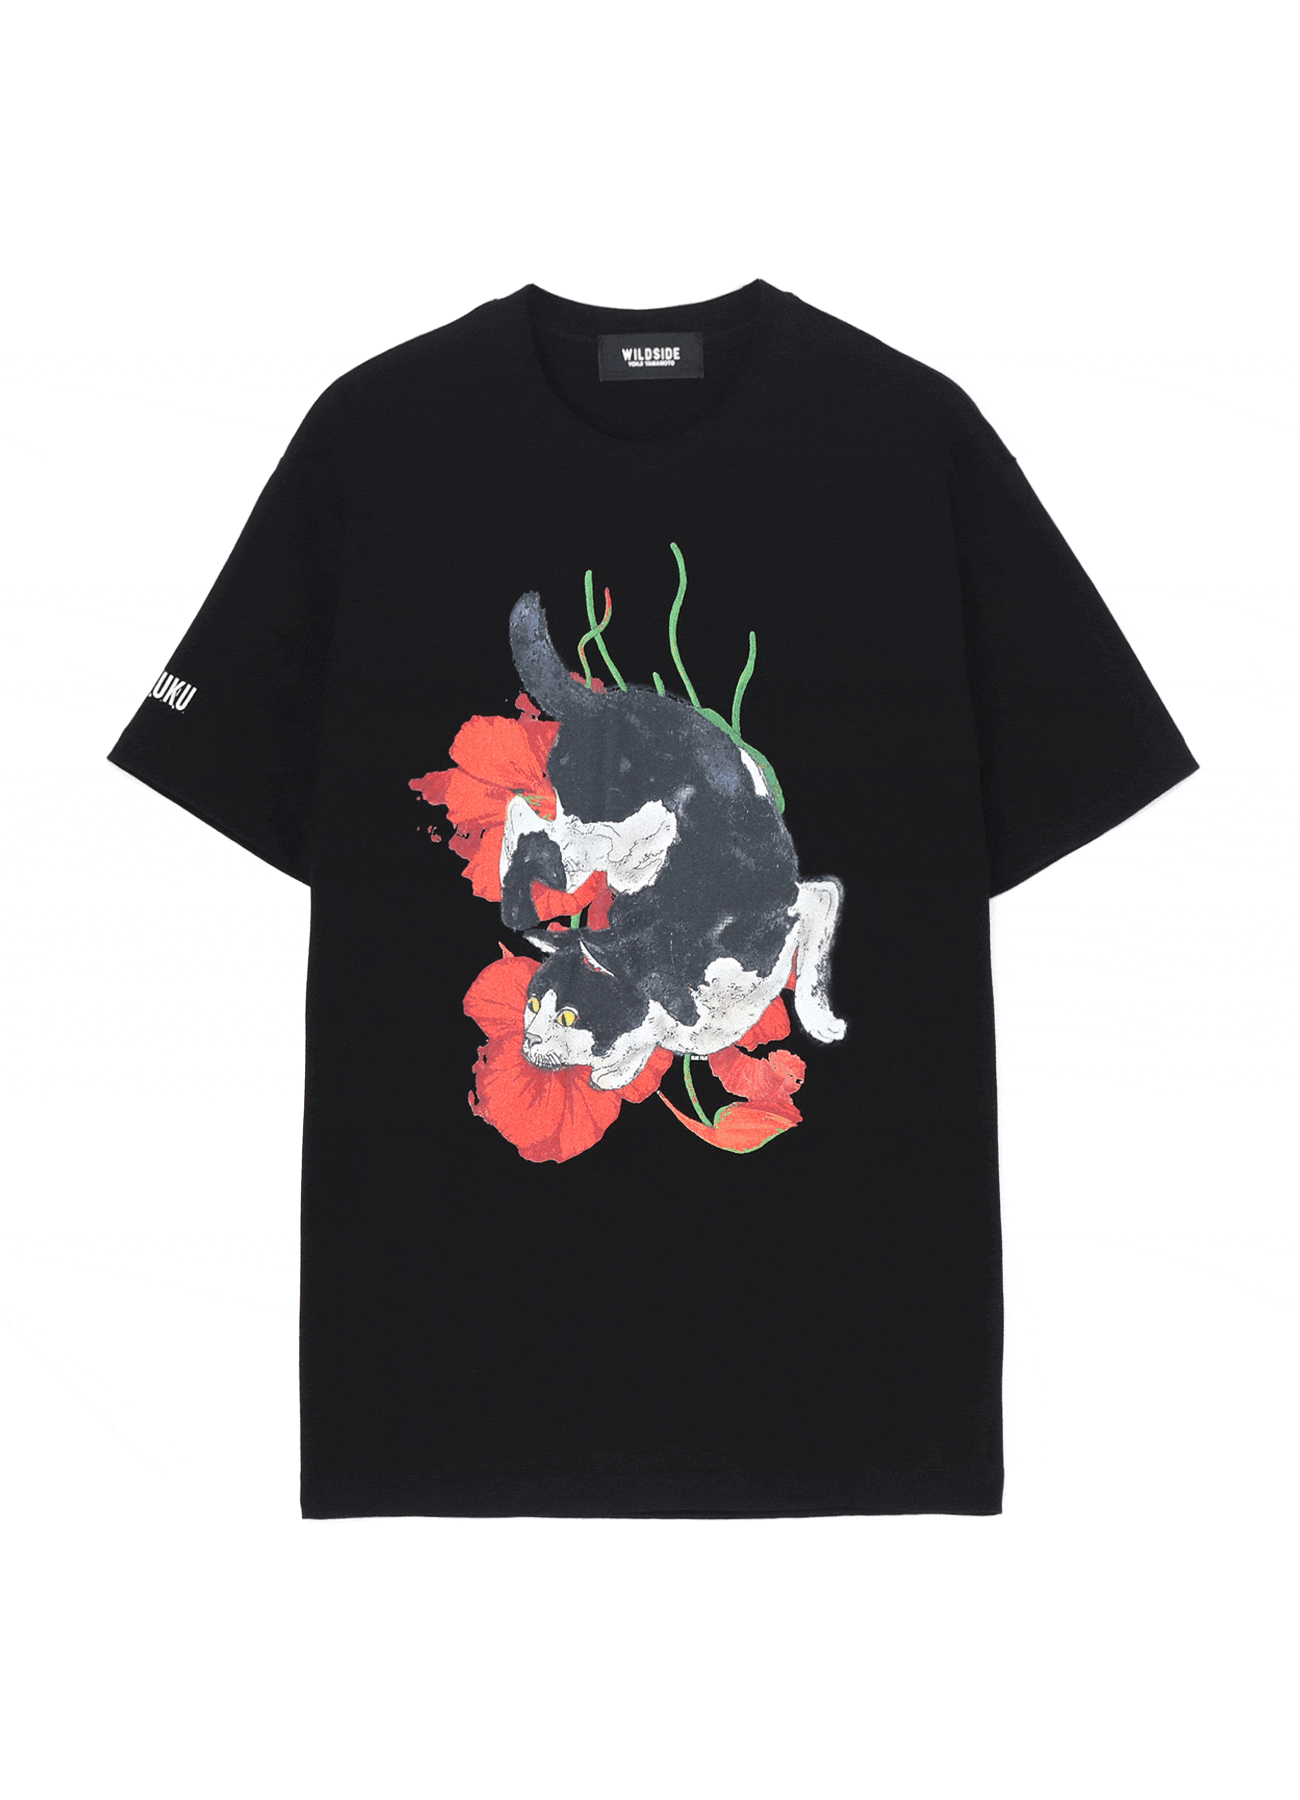 【5/15 12:00 release】HARAJUKU Cat and Flower SS T-shirt